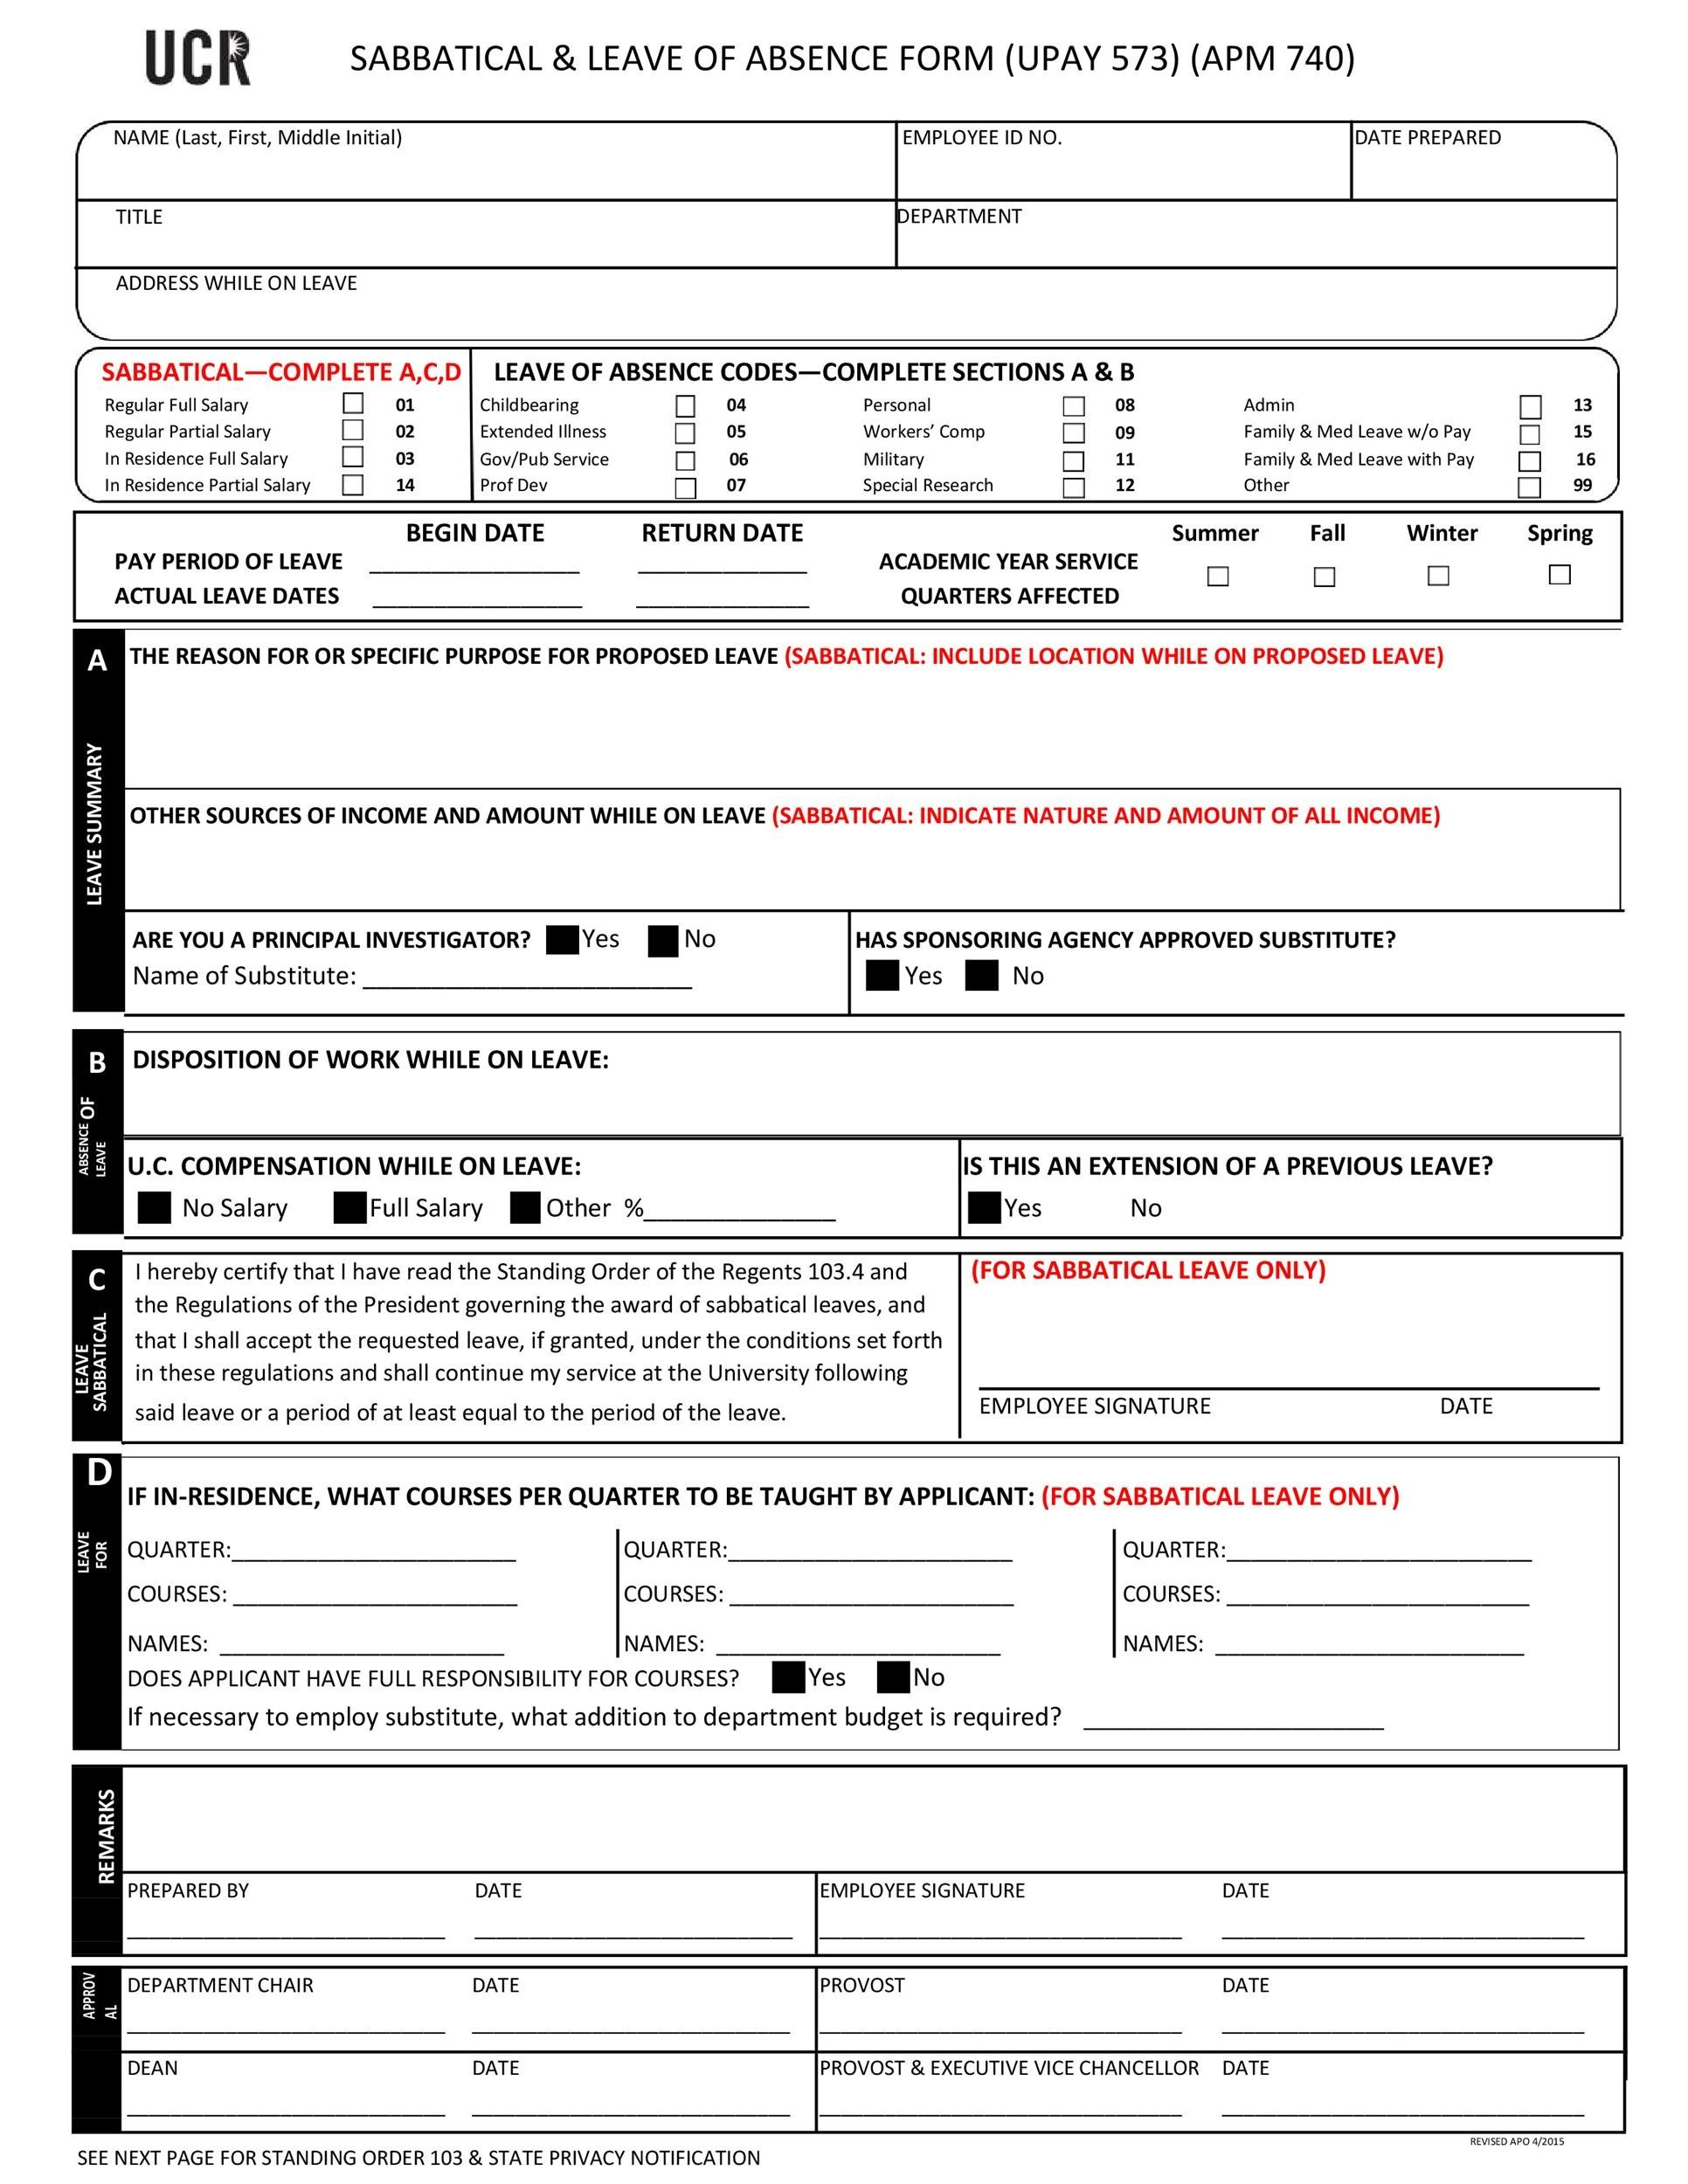 45 Free Leave Of Absence Letters And Forms Template Lab